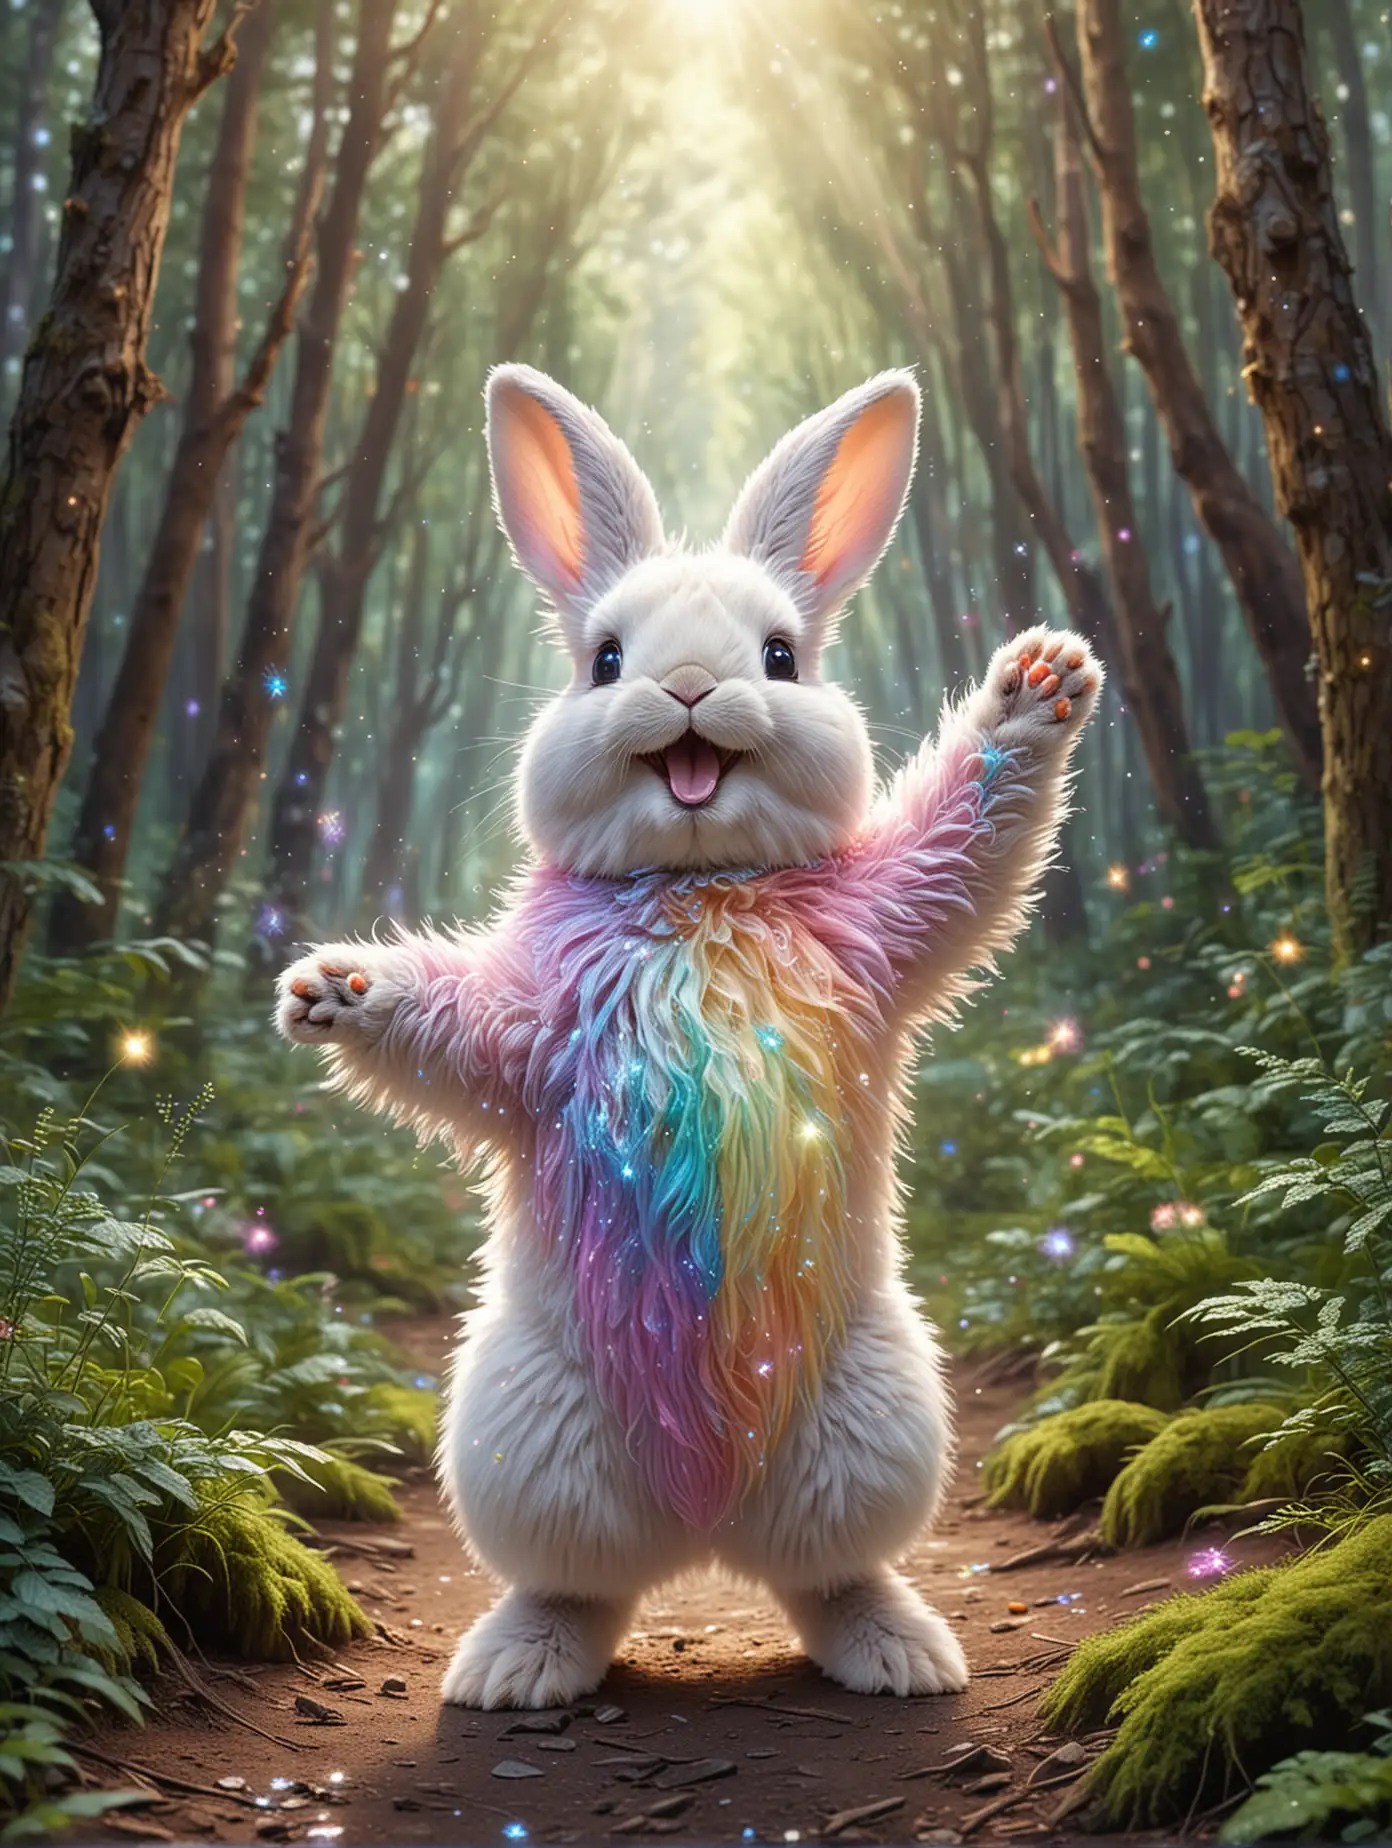 please create a transcendent pastel rainbow sparkly heavenly artwork of a bunny with sparkly fur on its stomach, smiling, happy, standing proud, arms open, showing off its stomach, in a peaceful magical forest